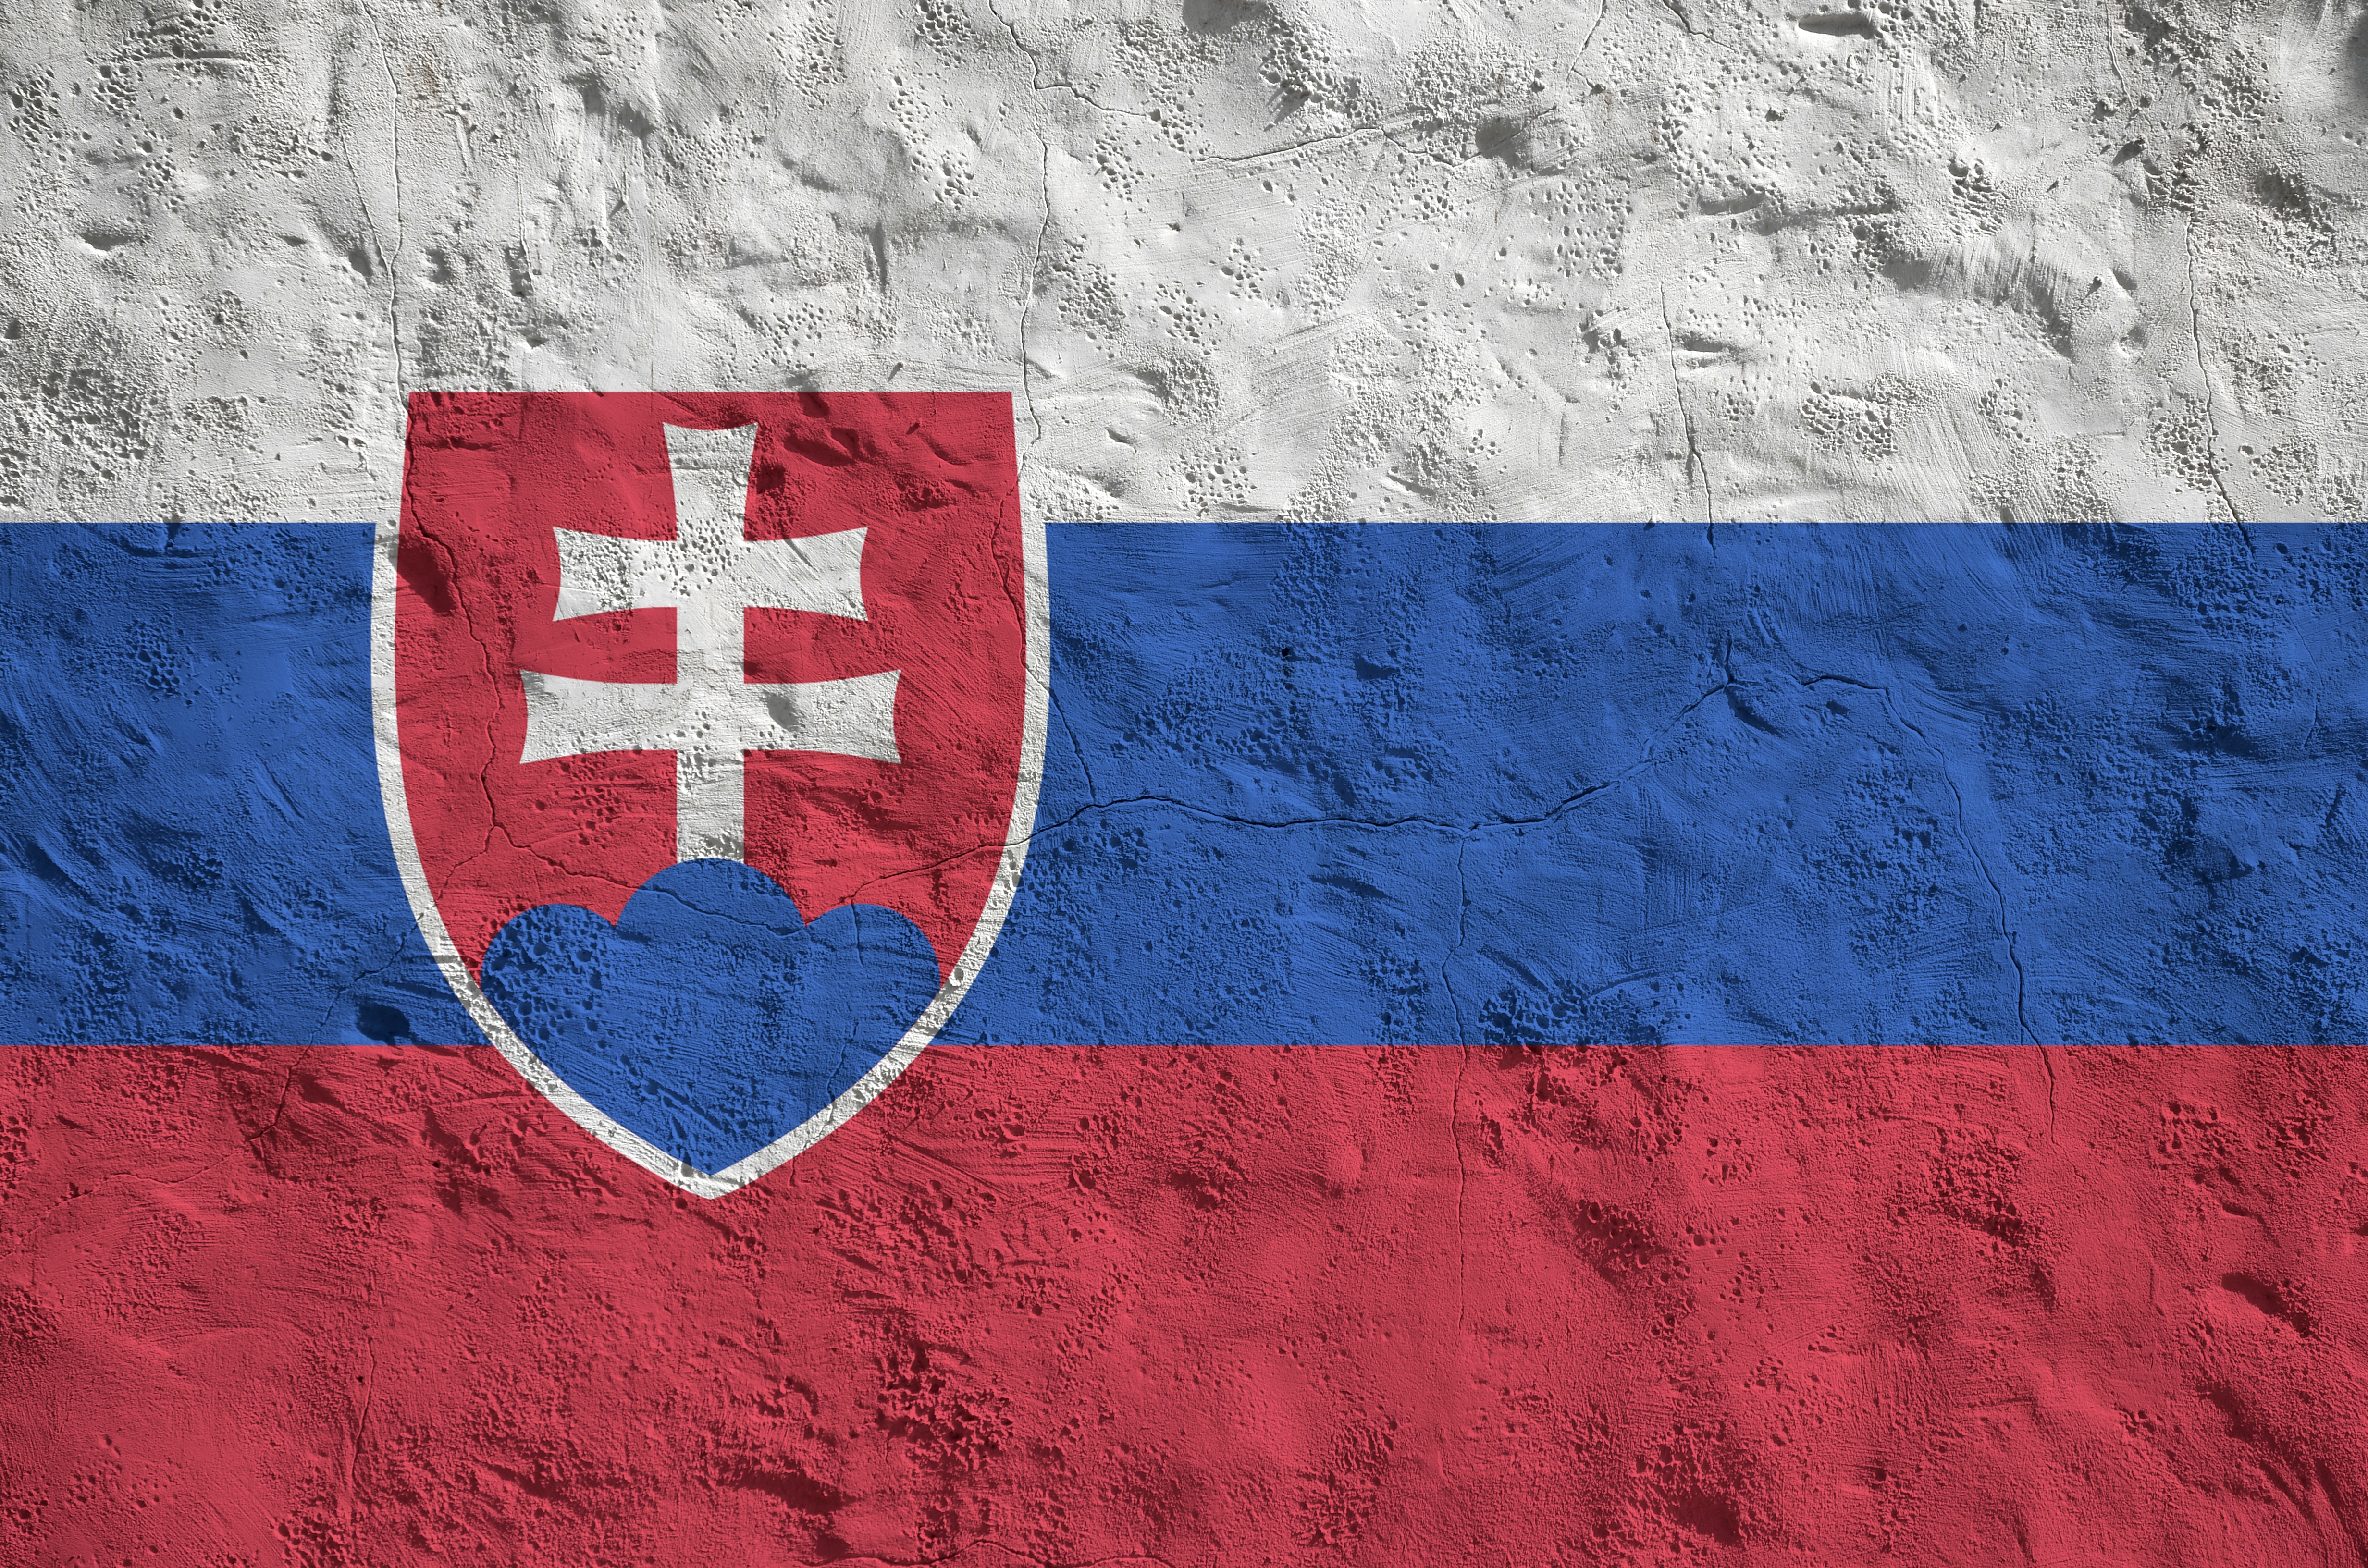 Slovakia flag depicted in bright paint colors on old relief plastering wall close up